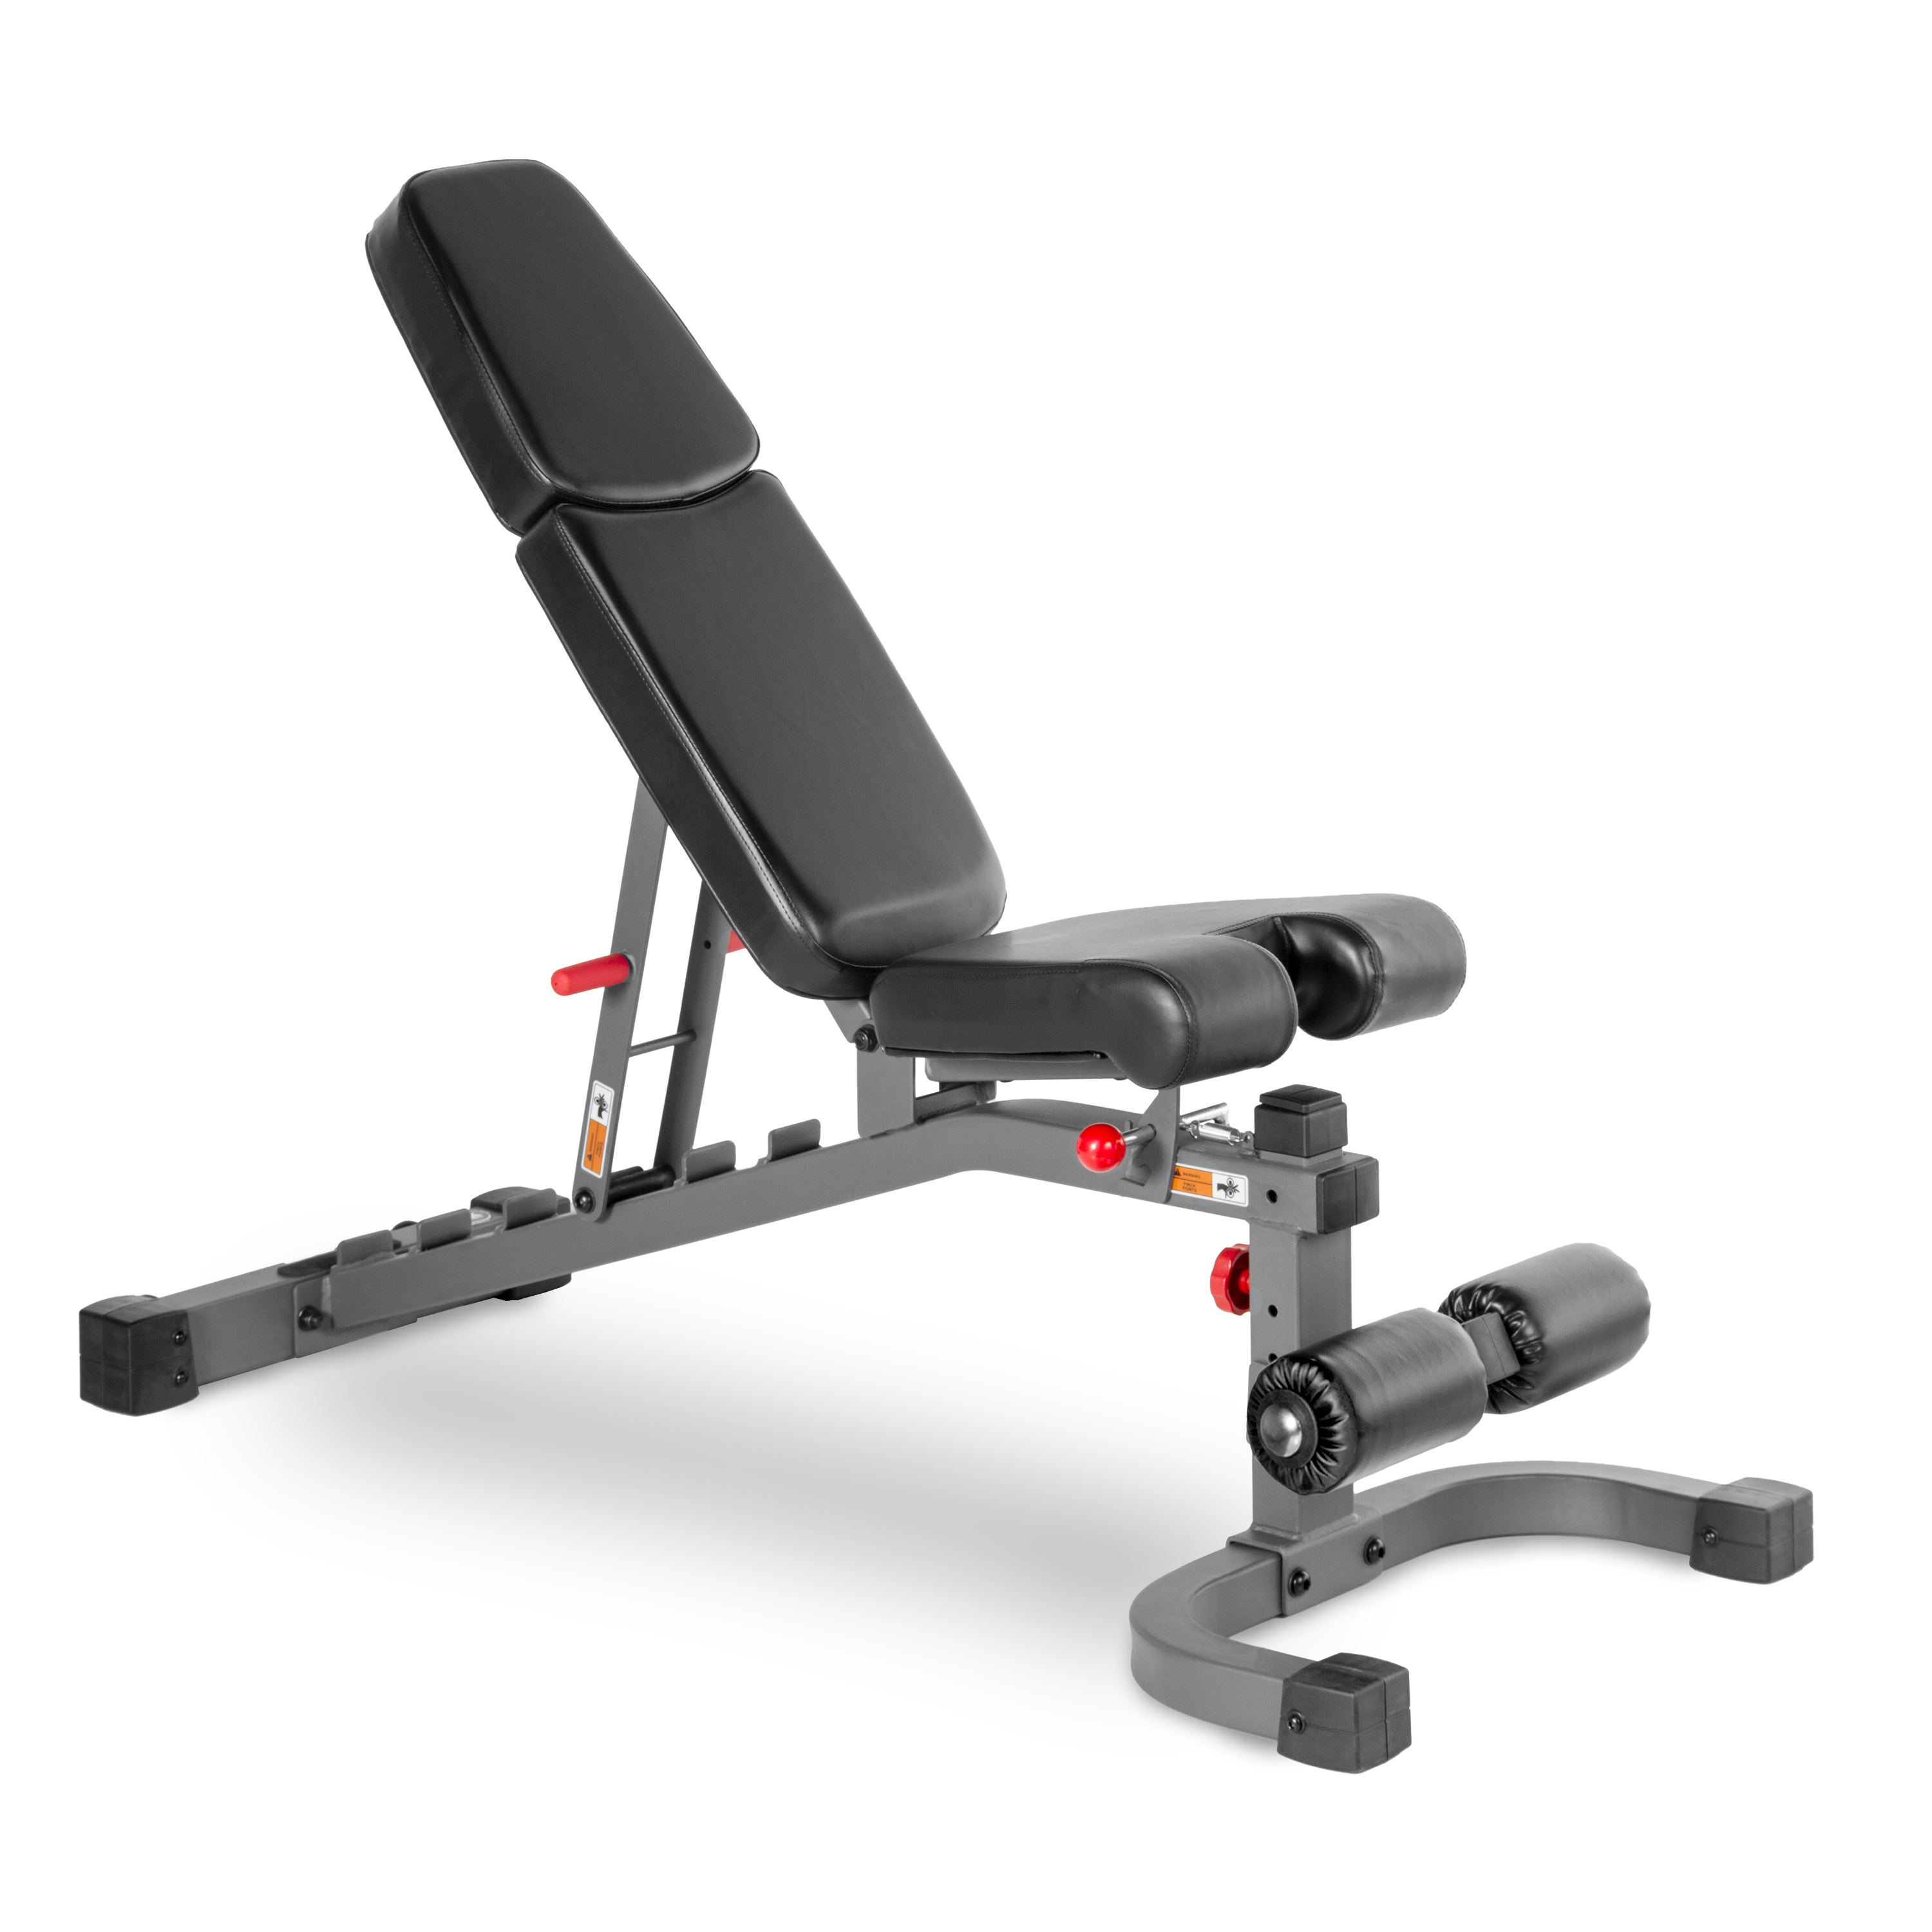 XMark Commercial FID Flat Incline Decline Weight Bench - image 1 of 3